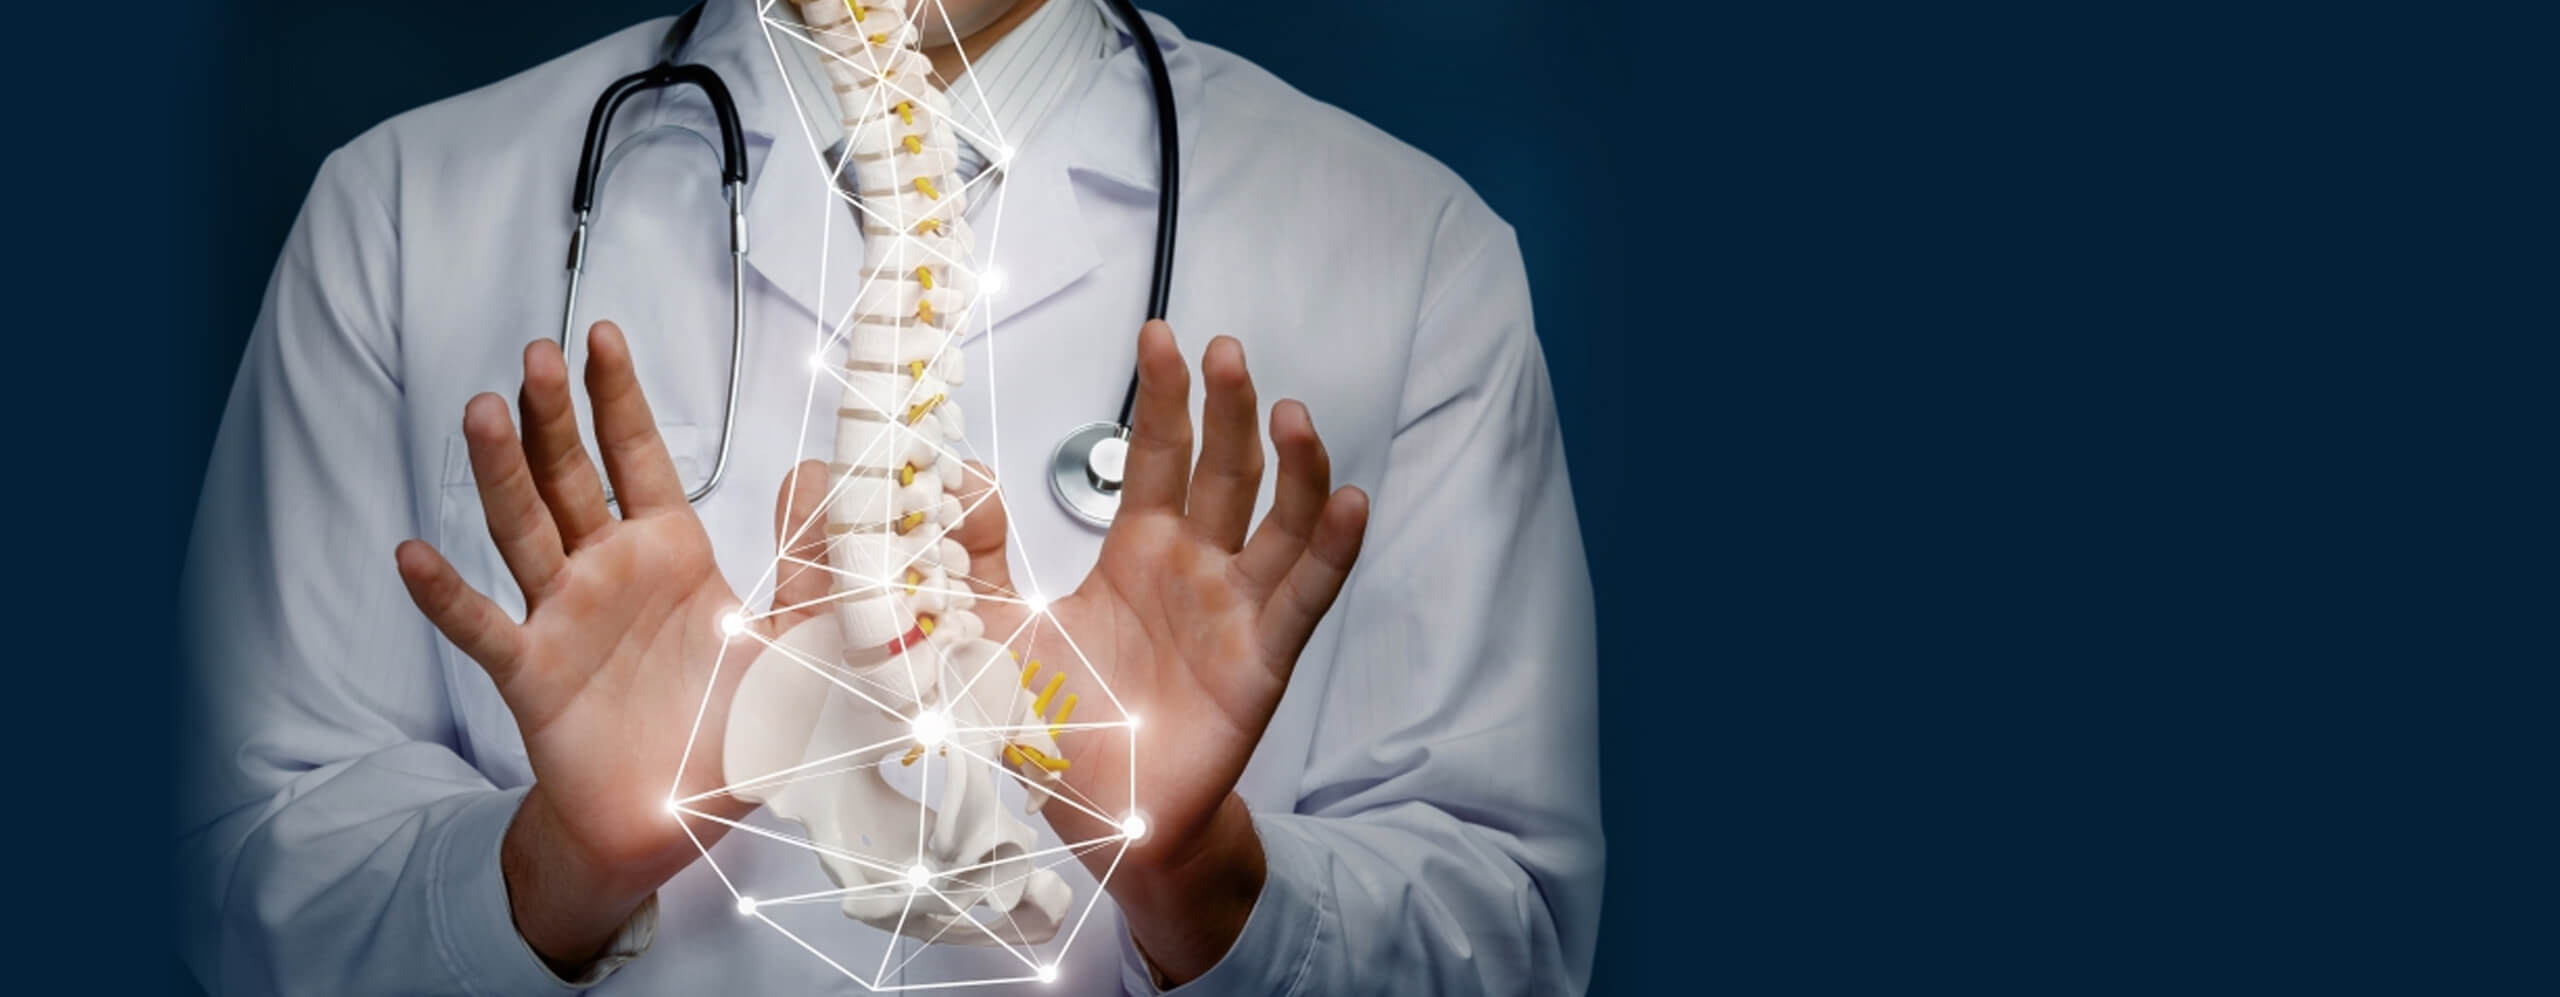 Spine Care And Treatment The Spine Clinics